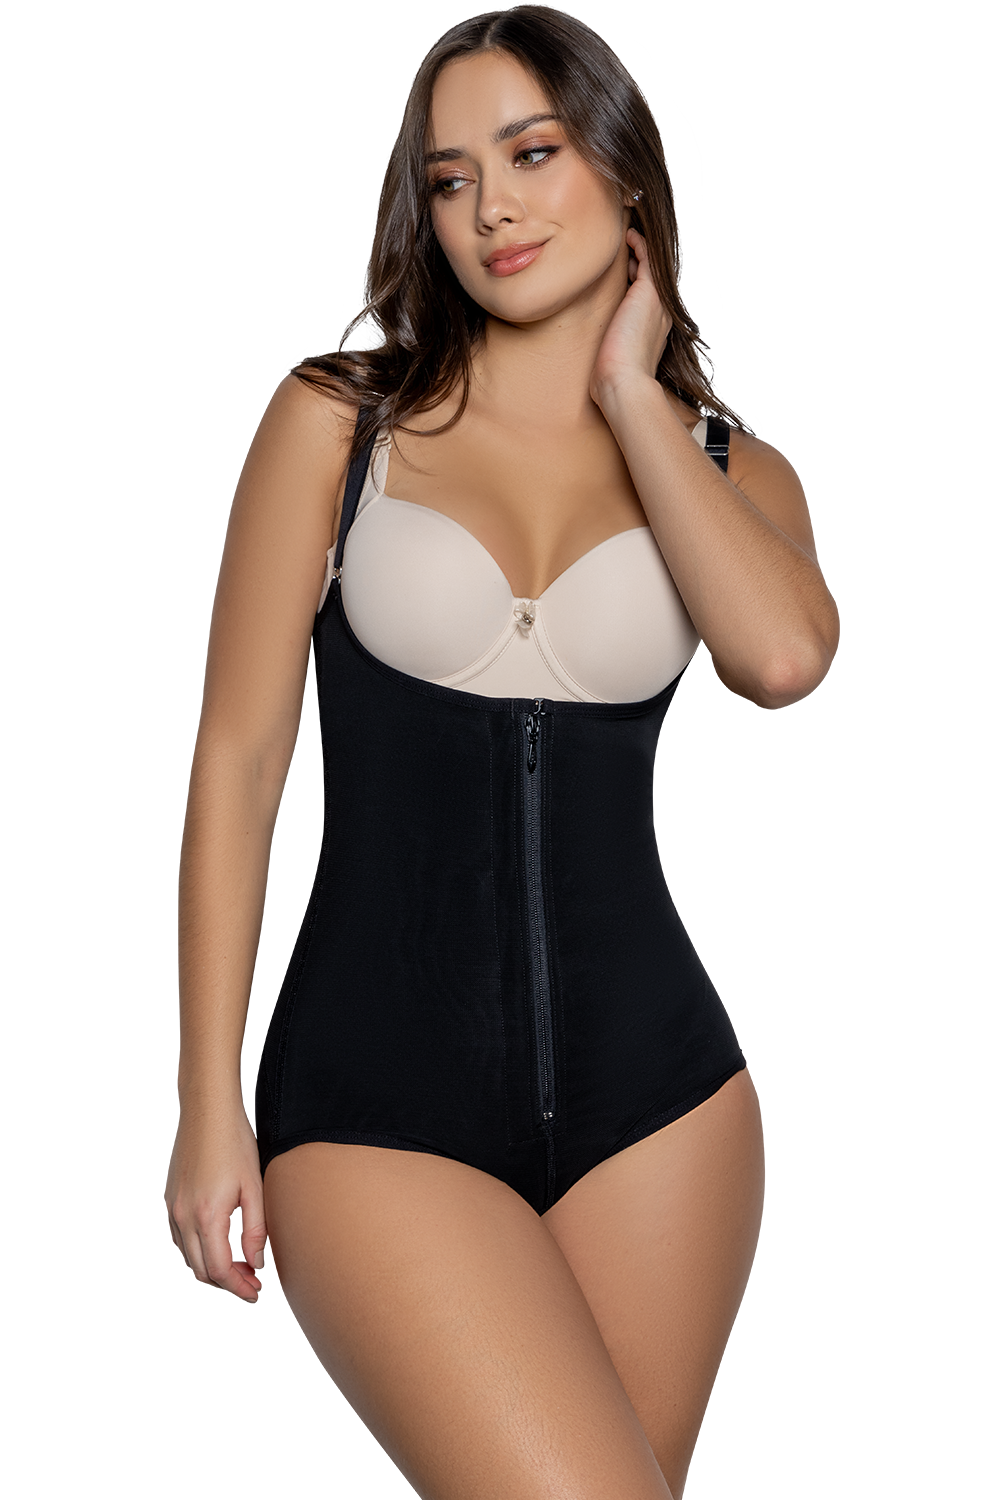 JACKIE LONDON 1015 - Panty Body Shaper With Covered Back And Zipper